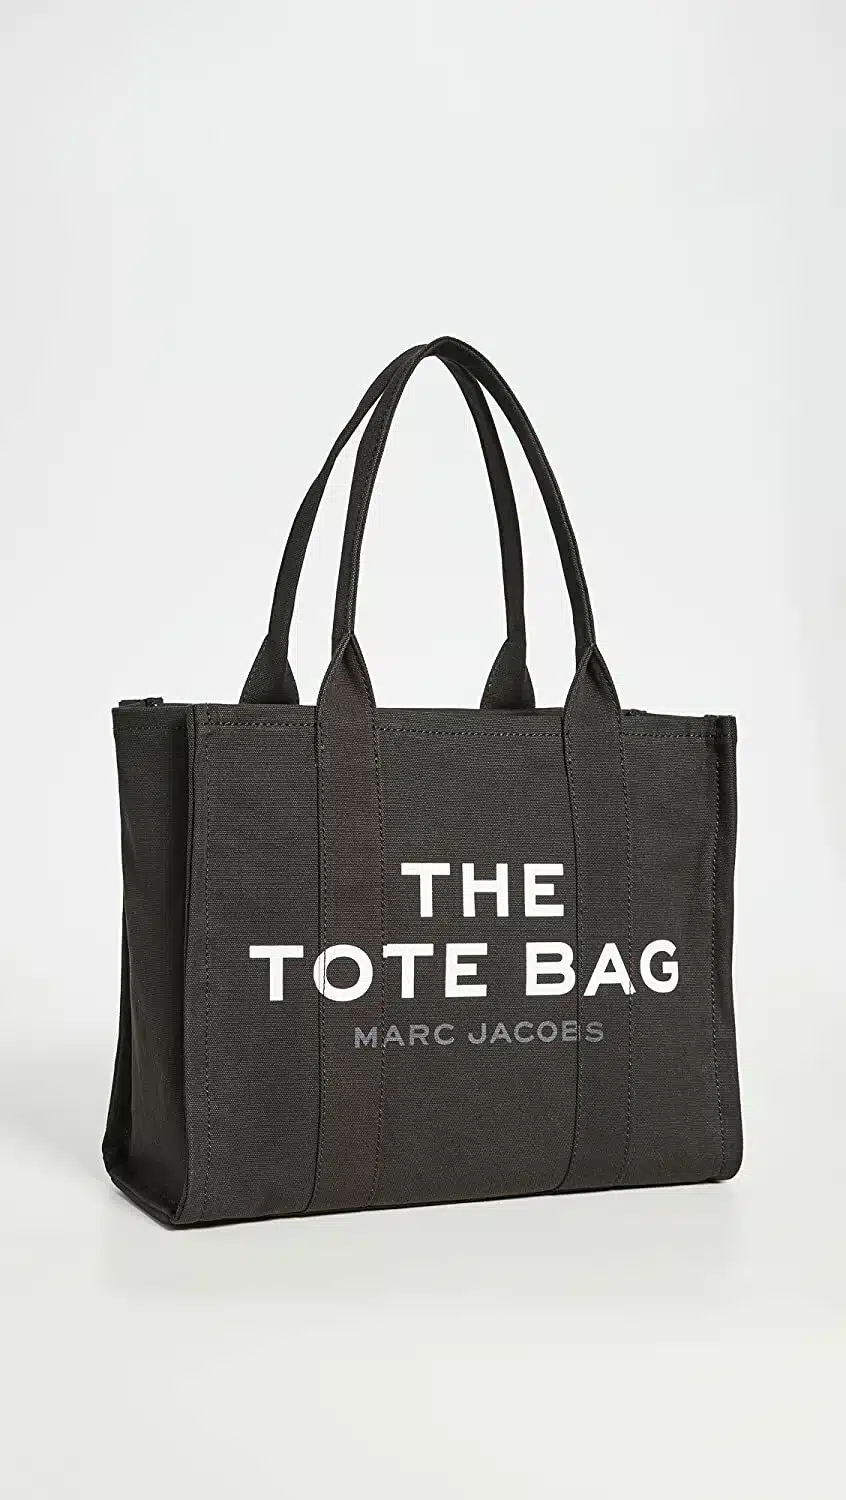 The best designer tote bags for work, by fashion blogger What The Fab 